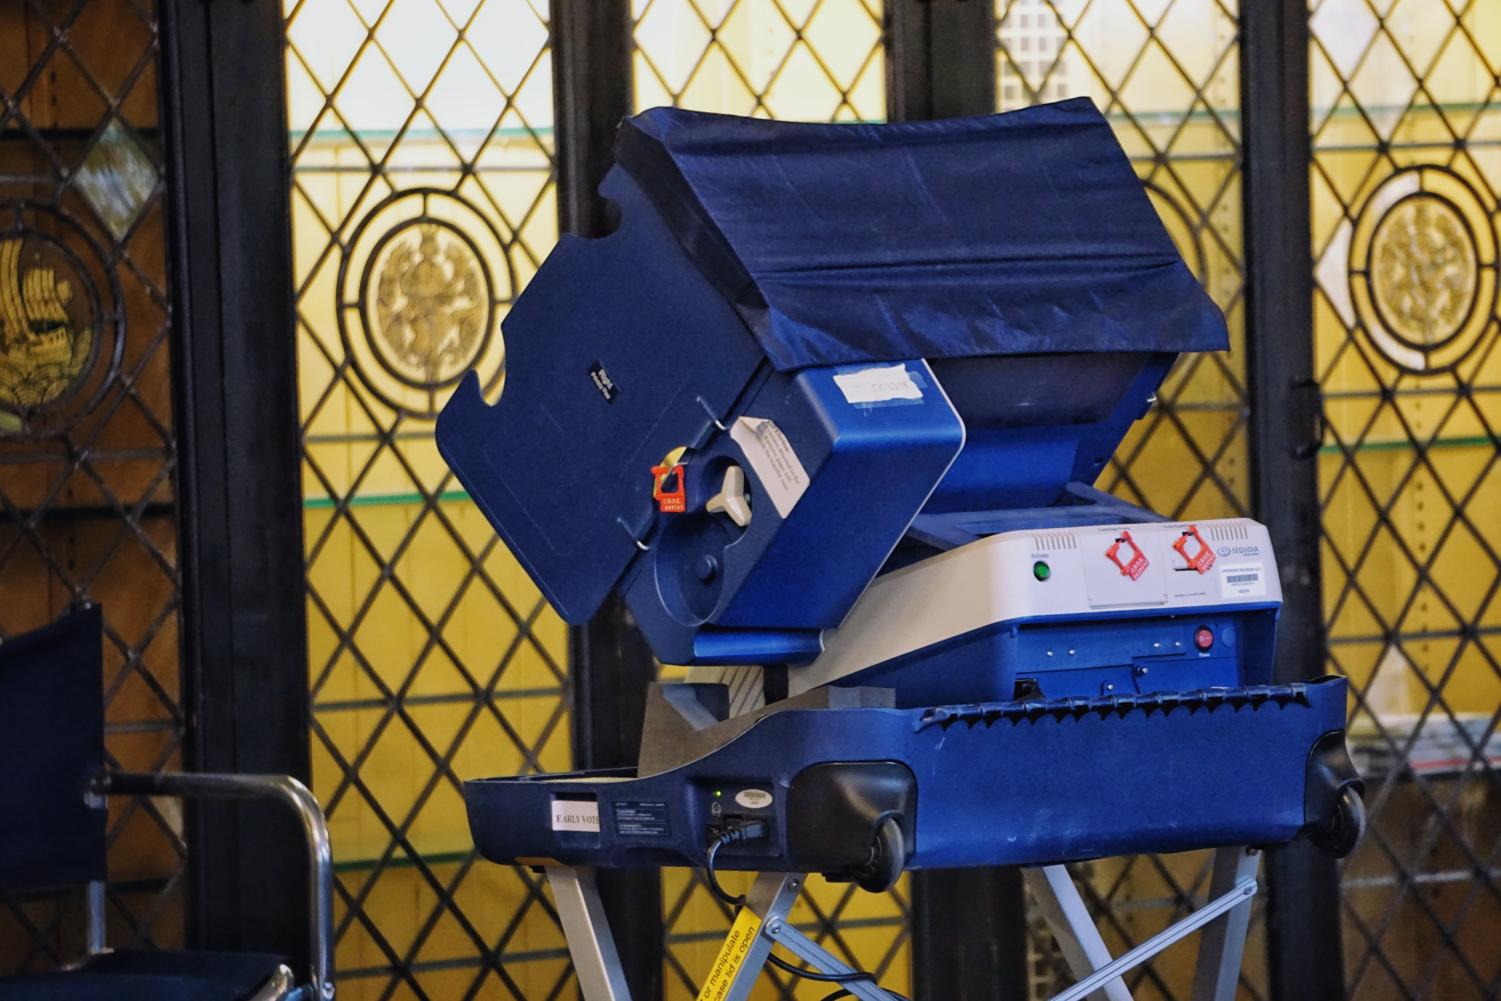 A voting machine in Reynold's Club, where students cast their votes for the midterm elections.